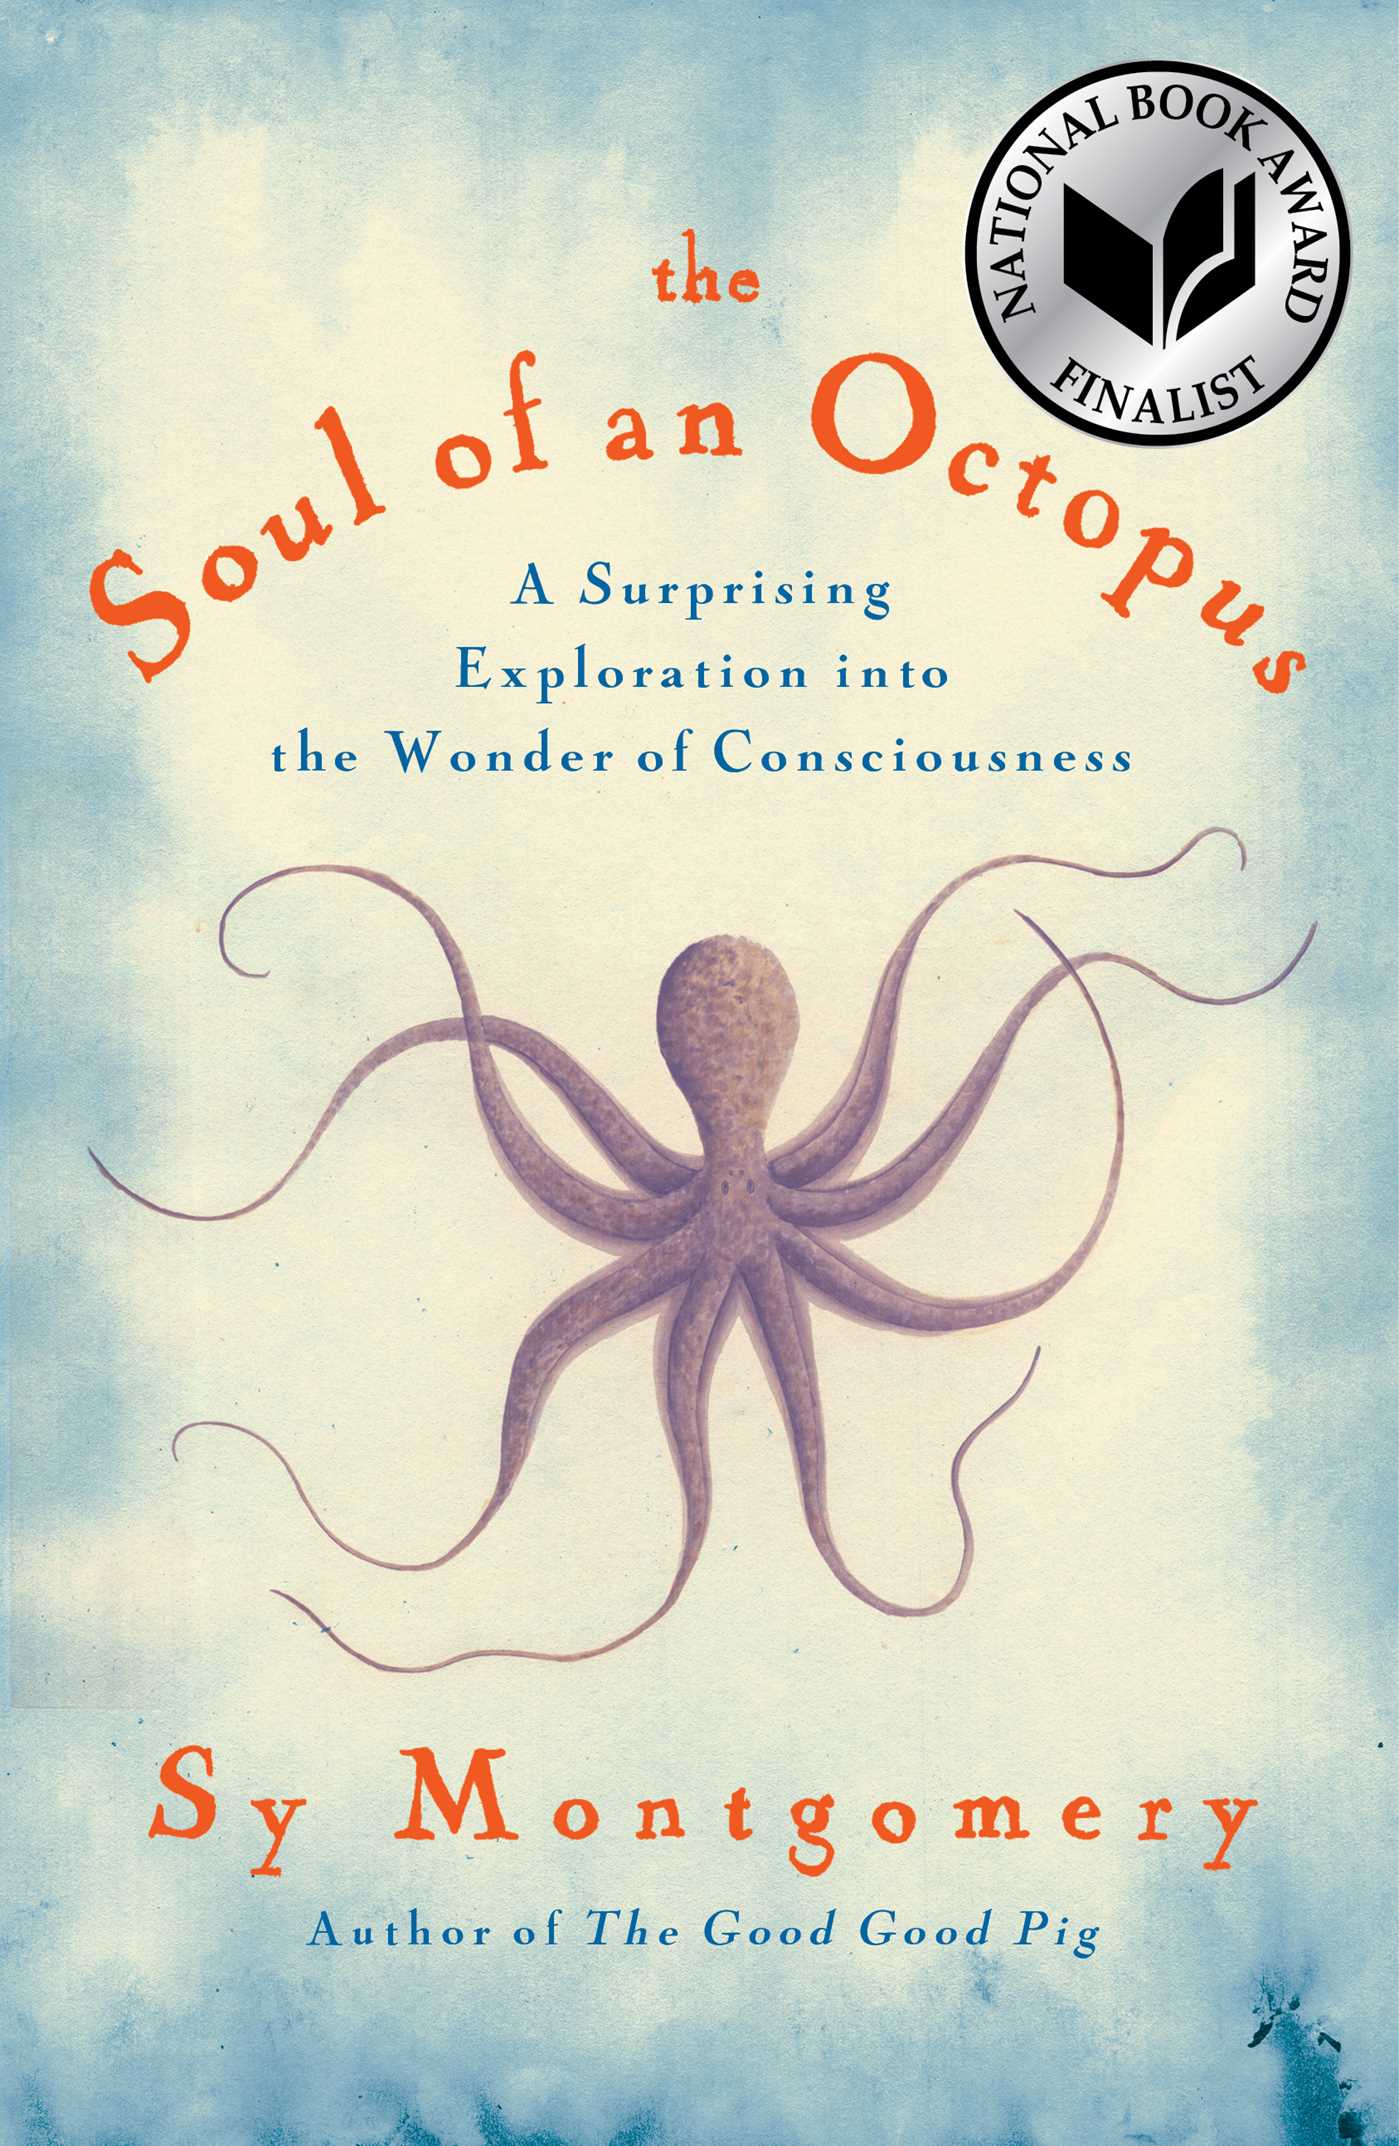 The soul of an octopus (2015)